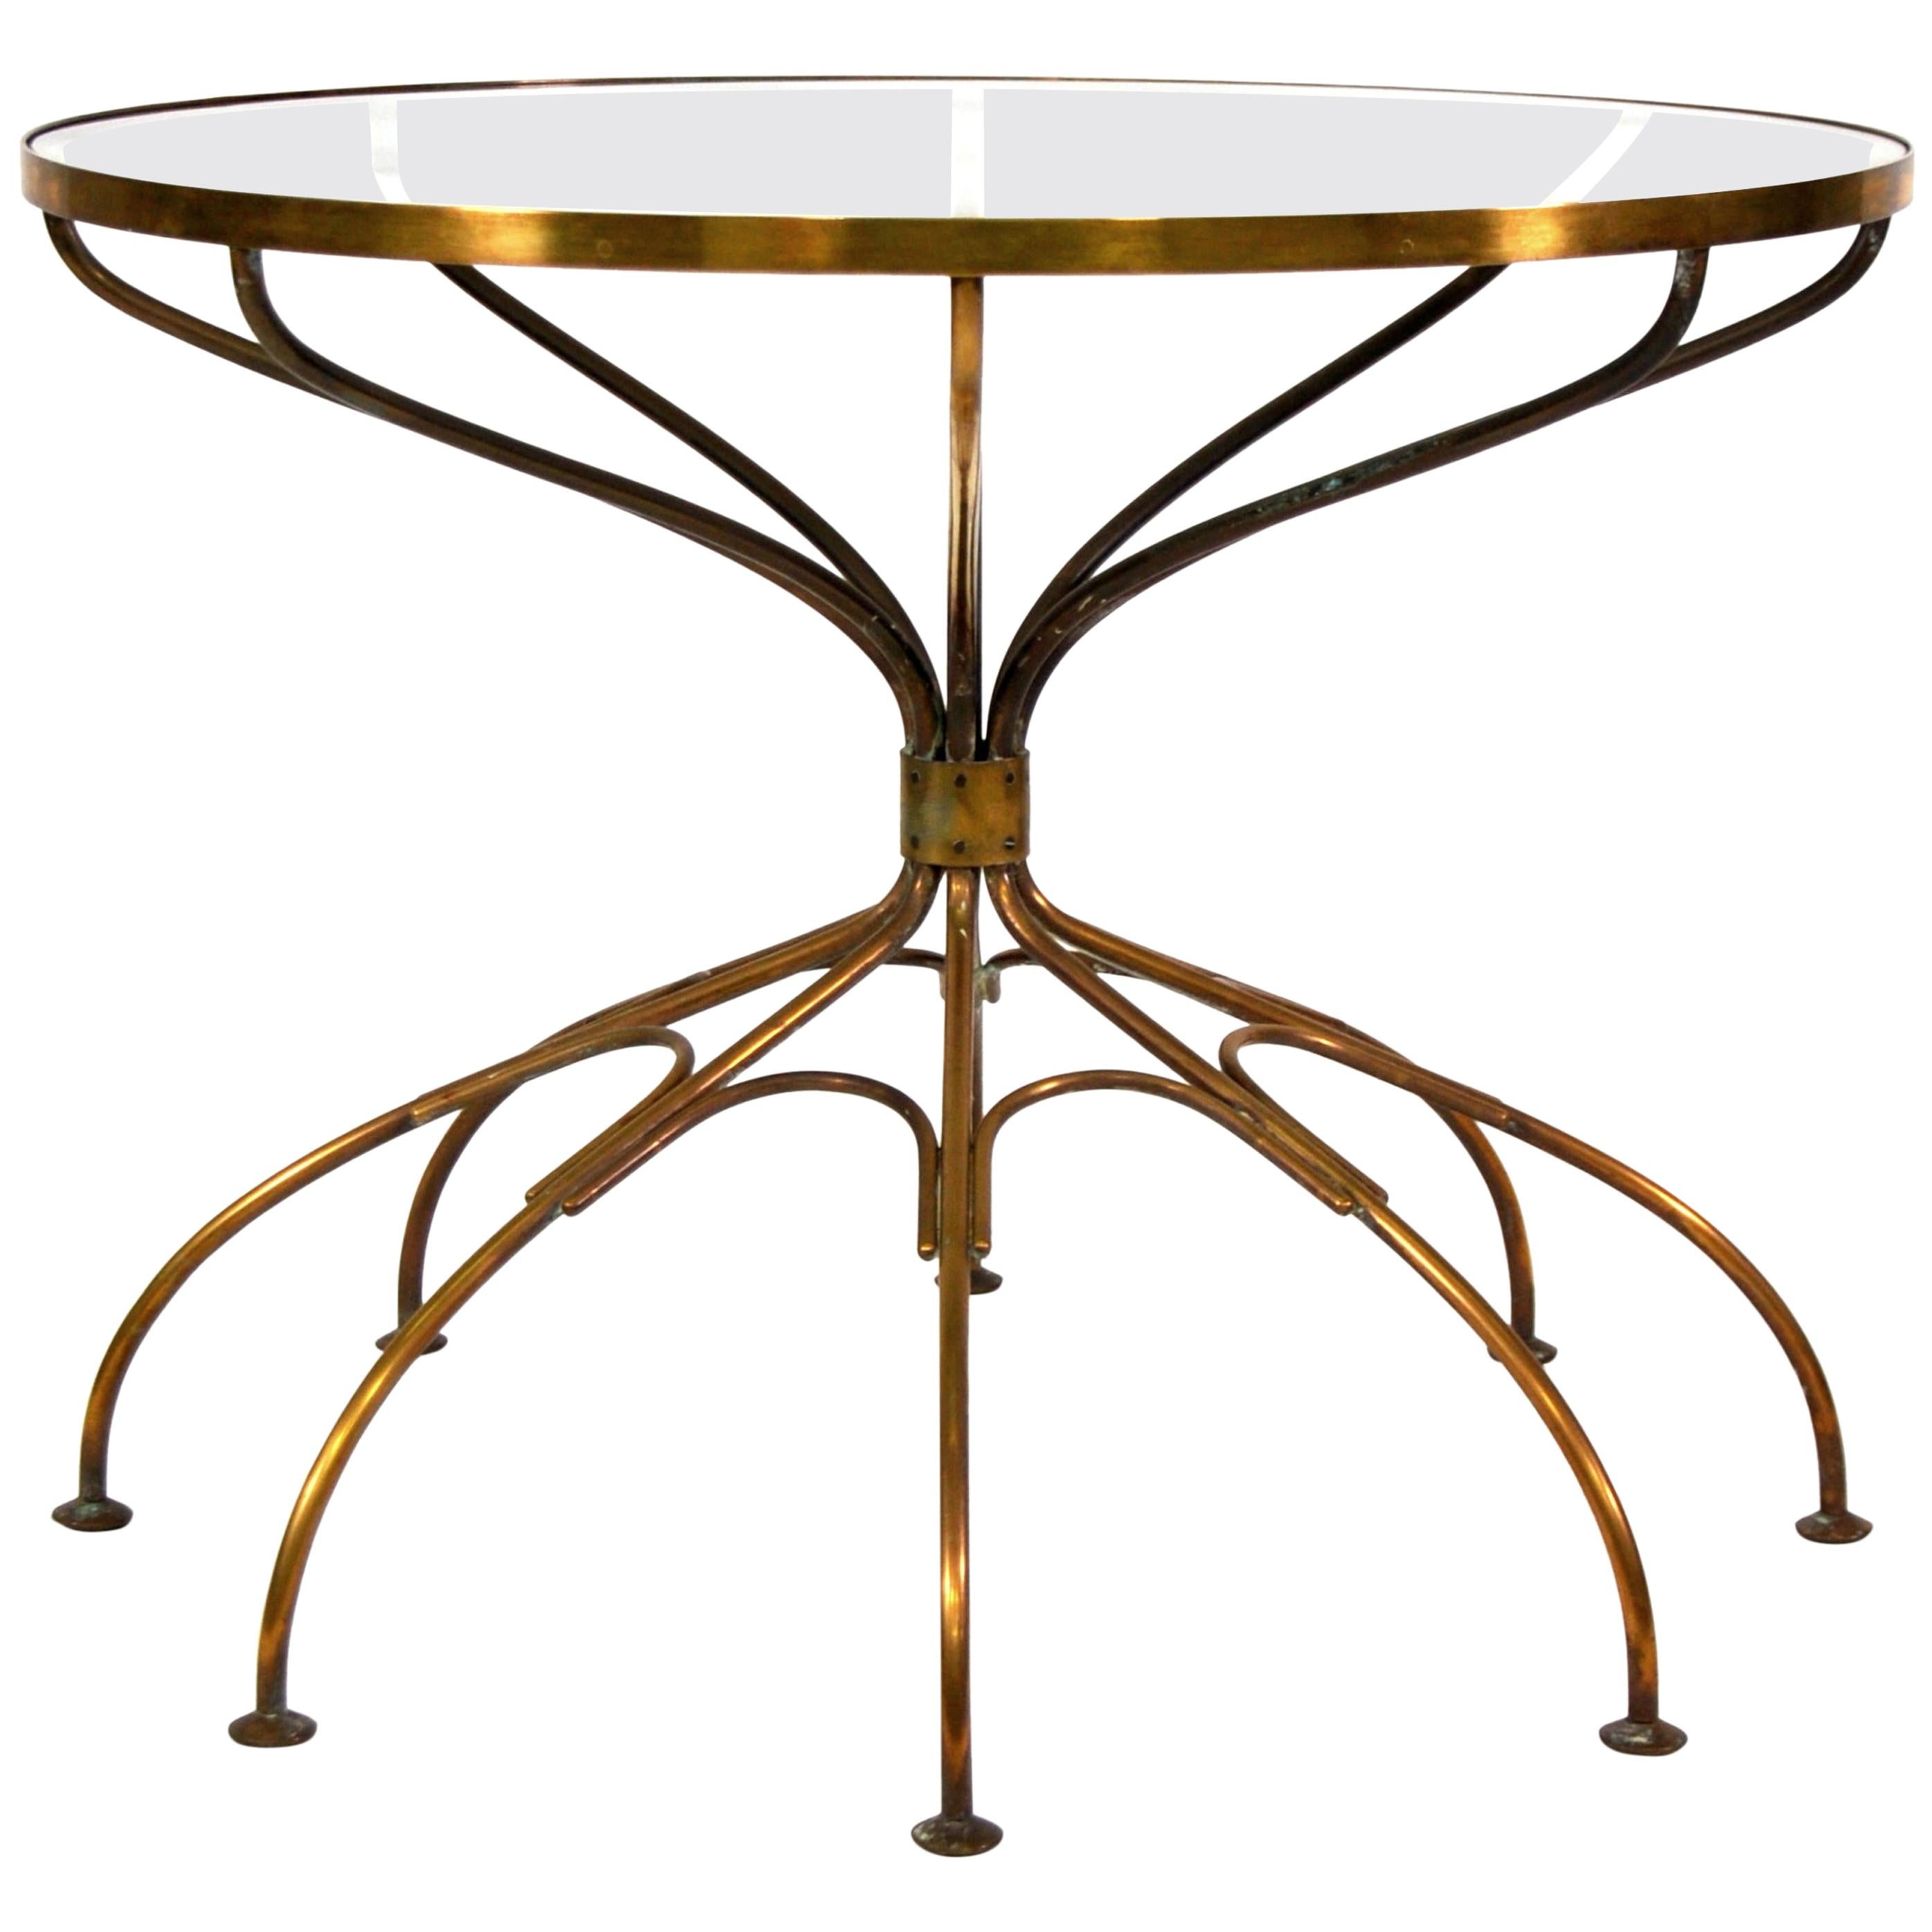 Italian Mid-Century Modern Brass and Glass Spider Side Table